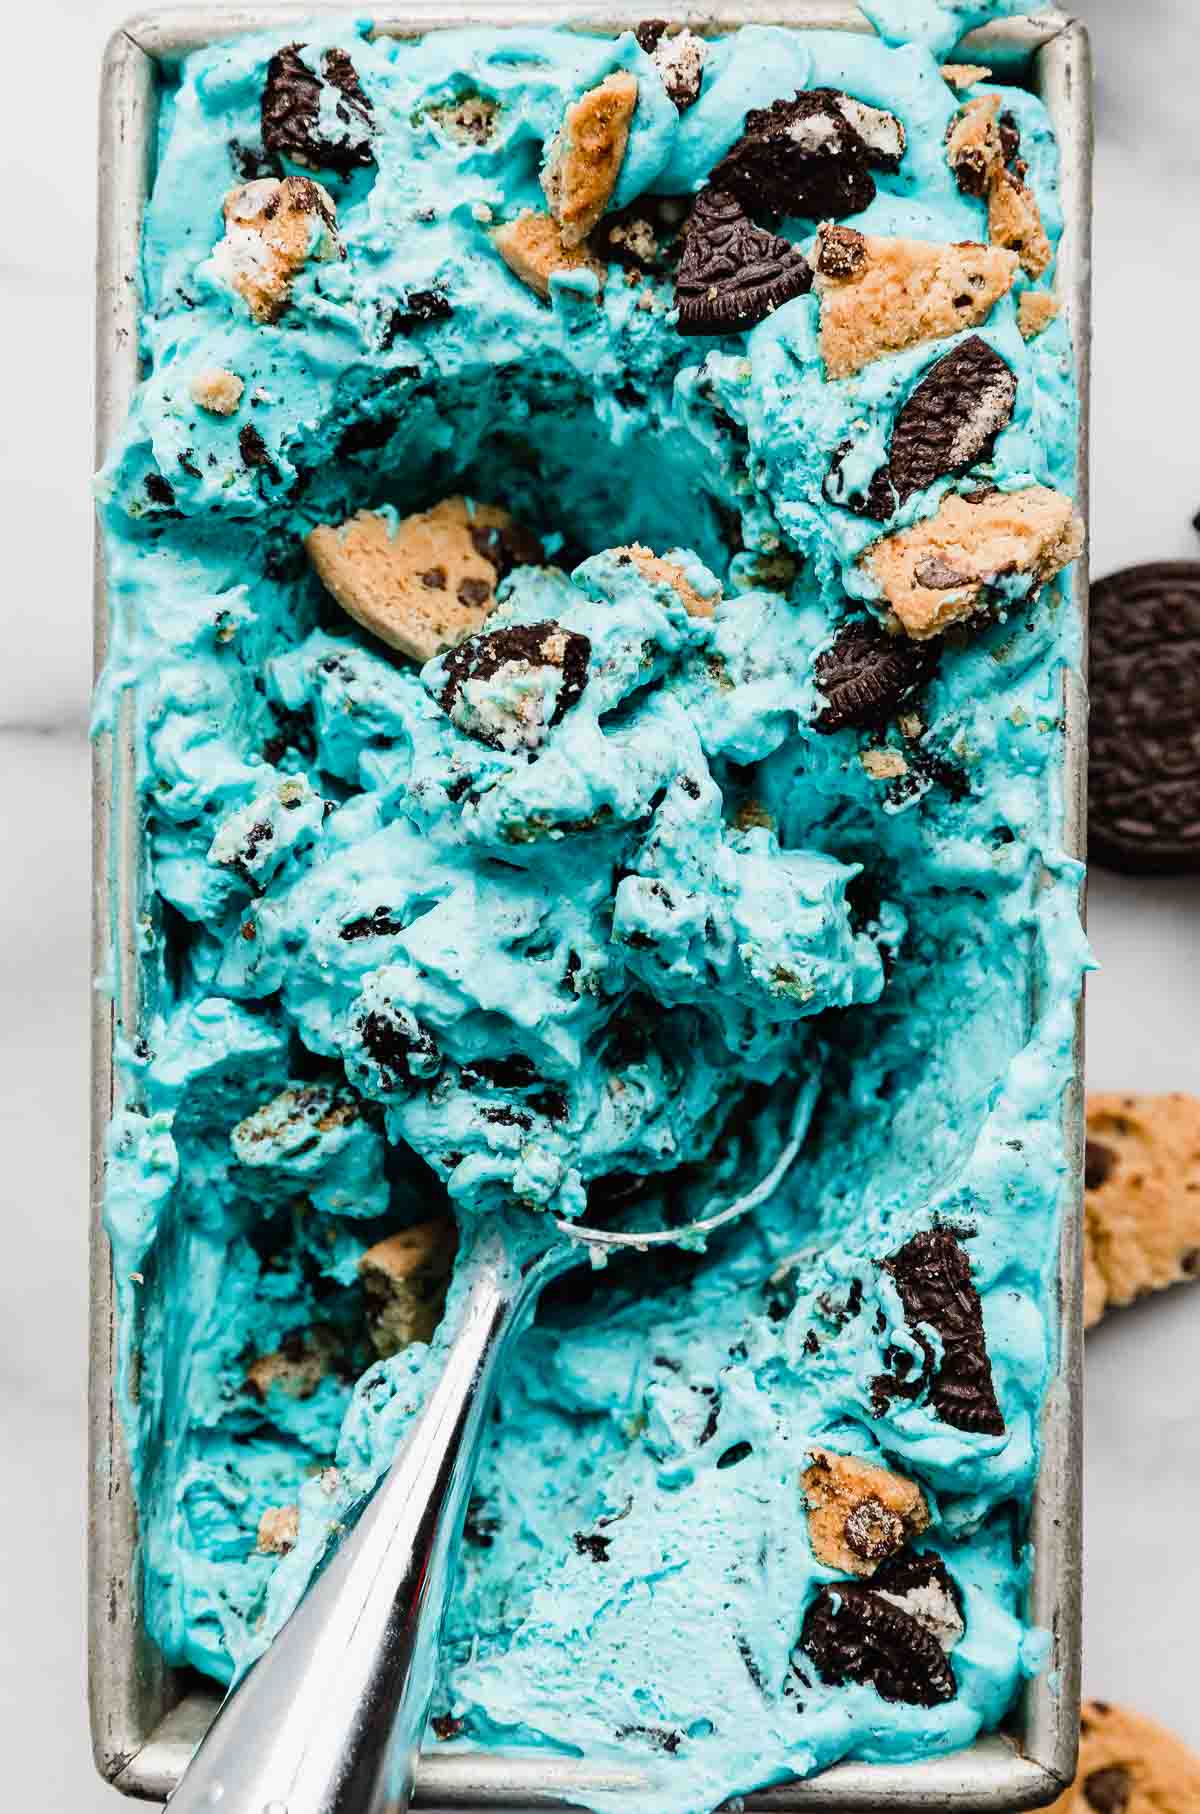 An ice cream scooper scooping up no churn blue Cookie Monster Ice Cream.